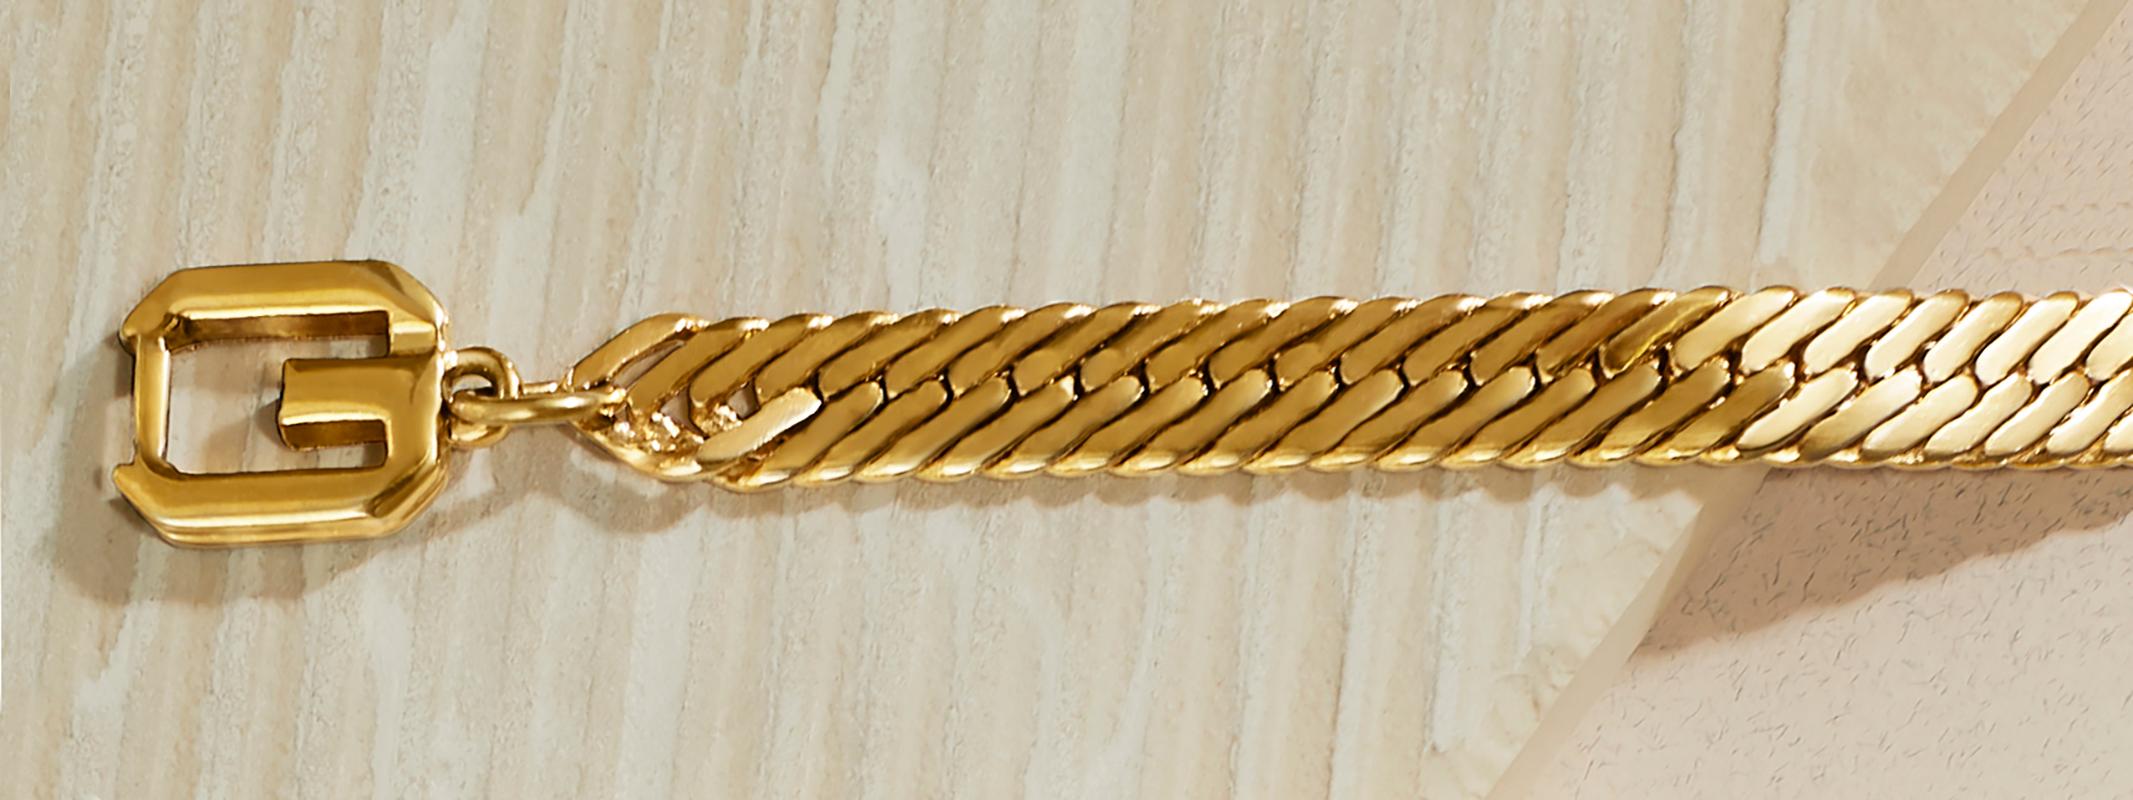 1980s Vintage Givenchy herringbone chain bracelet in gold plate.  This vintage bracelet features a flat, wide herringbone chain with a statement double G logo clasp.   Bracelet measures 7 1/4 inches in length, width just over 1/4 inch with a